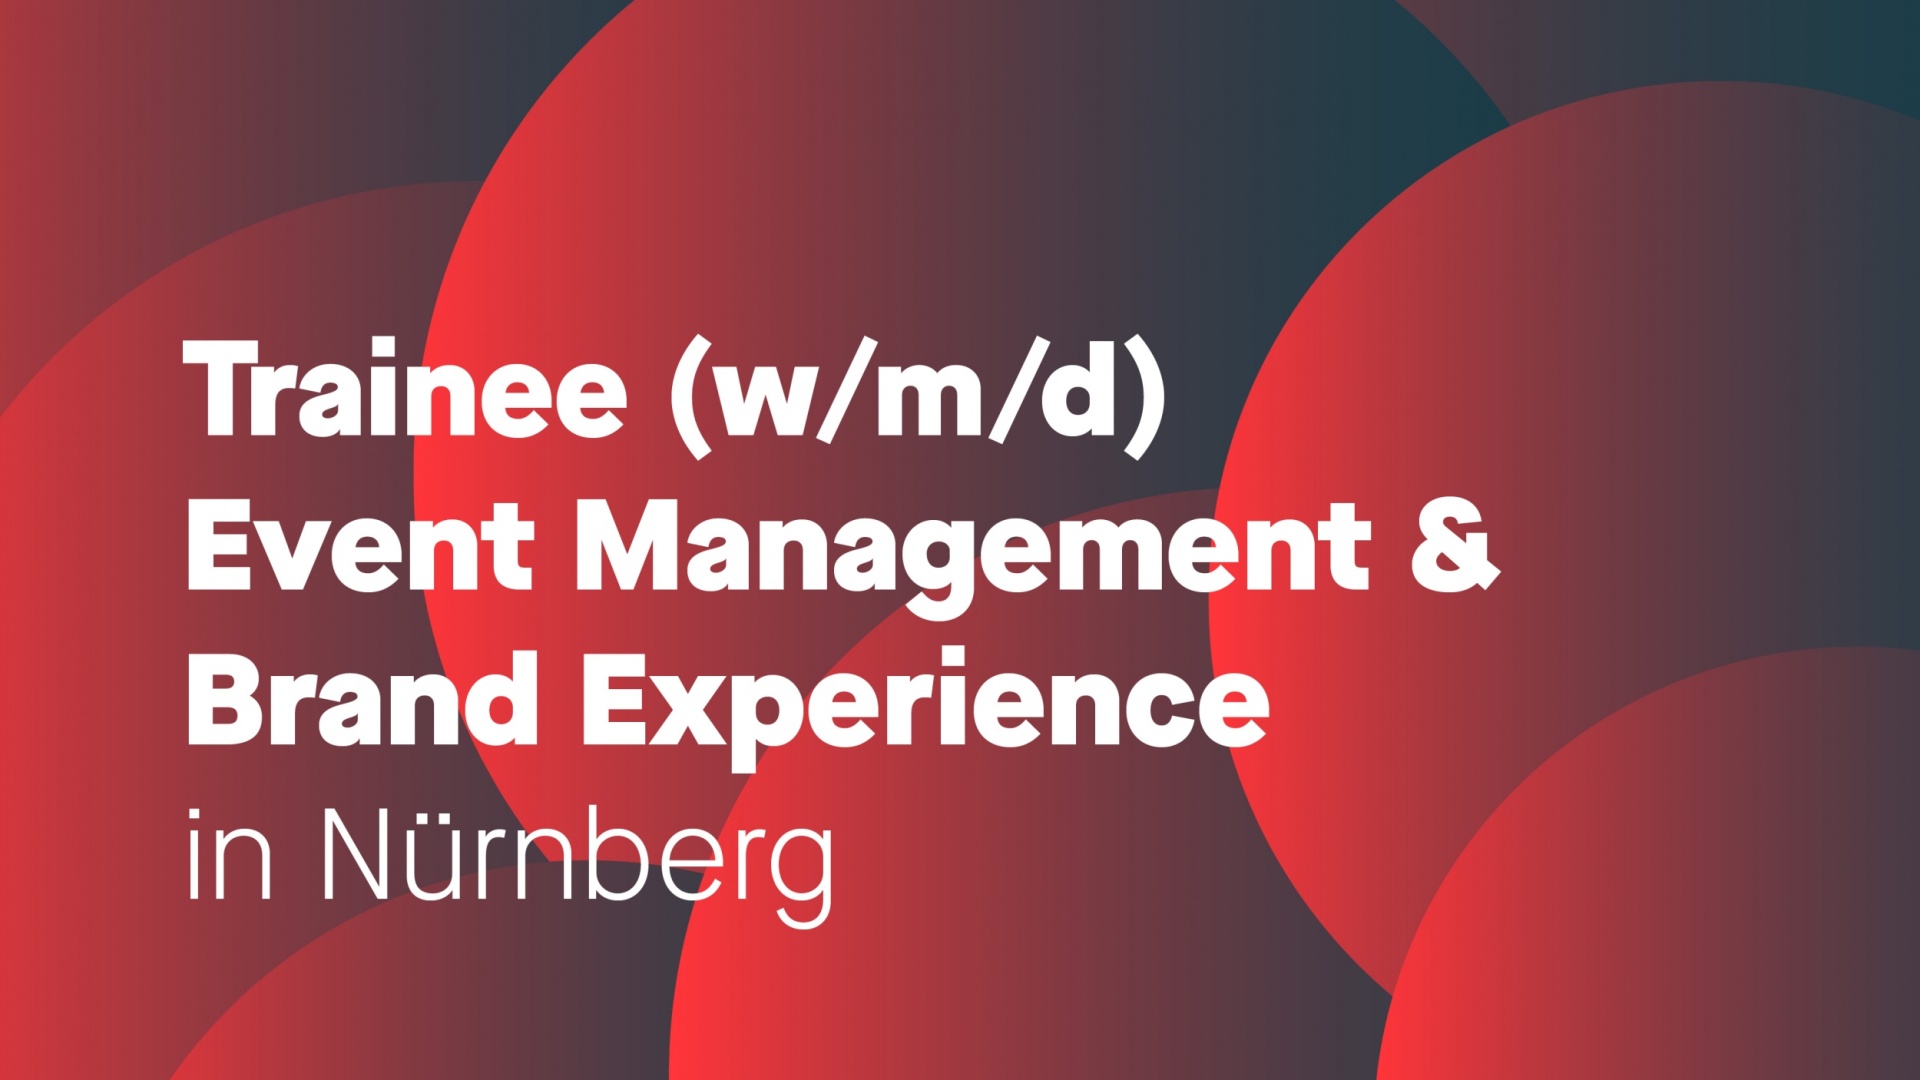 Trainee (w/m/d) Event Management & Brand Experience